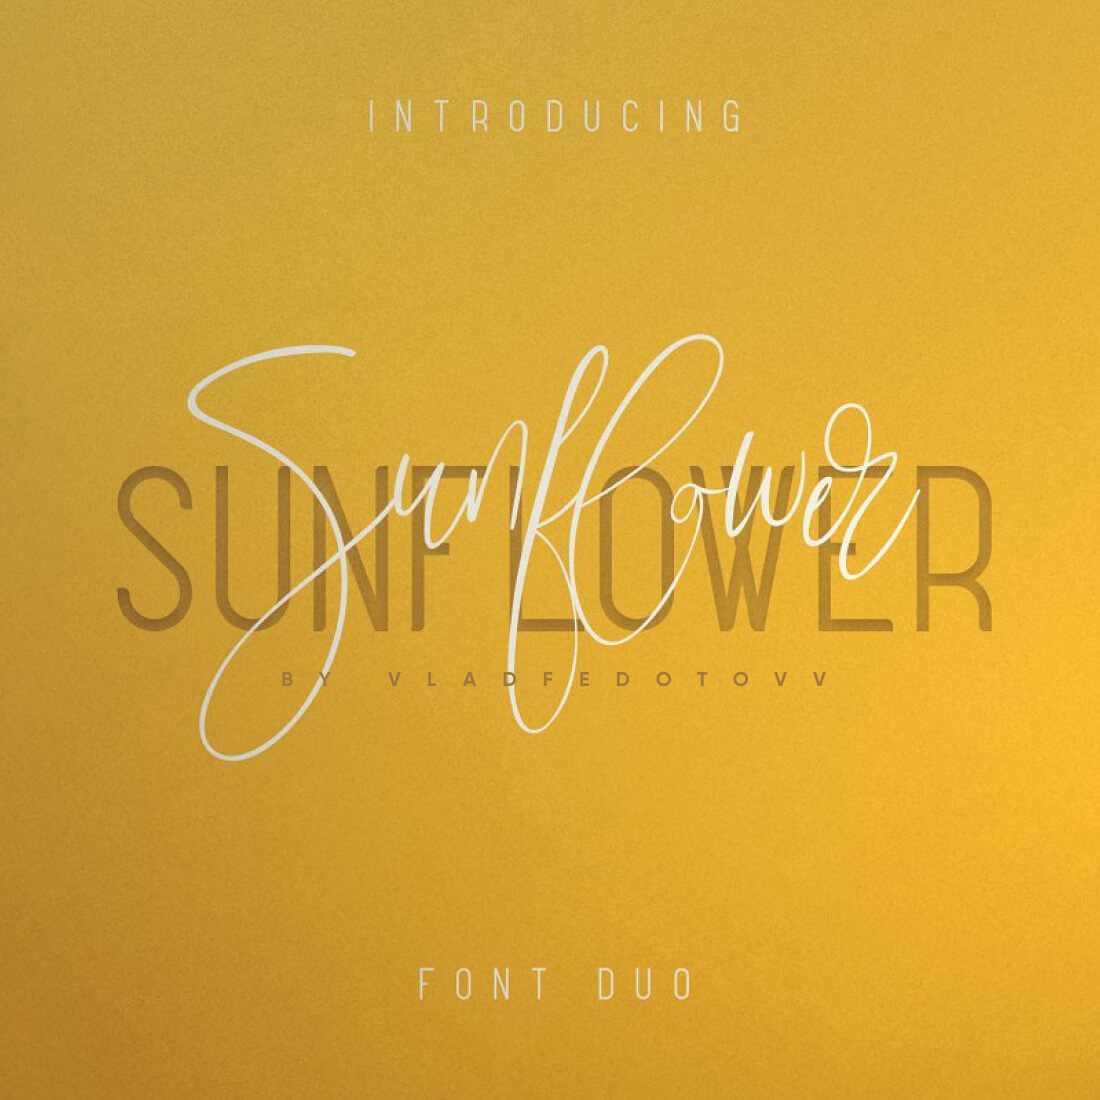 Sunflower Font Duo – Just now 19 cover image.